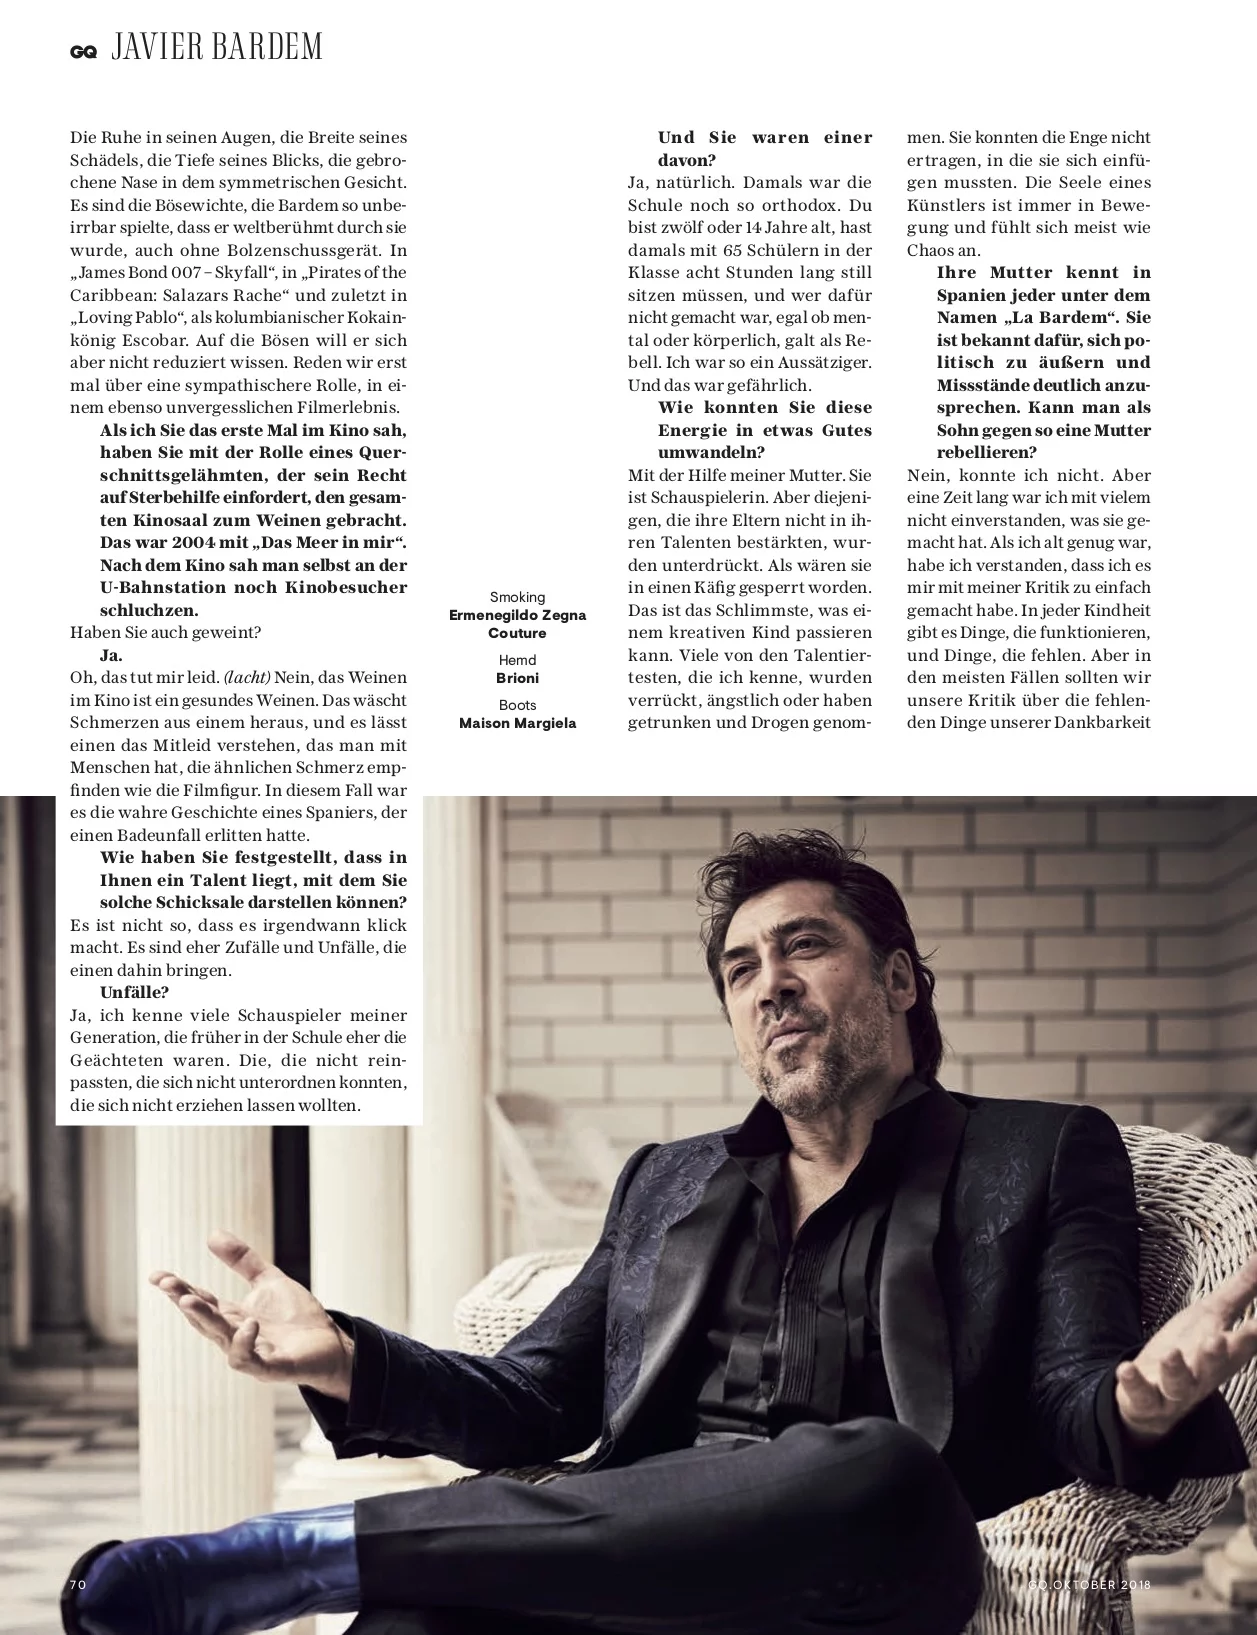 GQ with Javier Bardem 6 by Claudia ENGLMANN